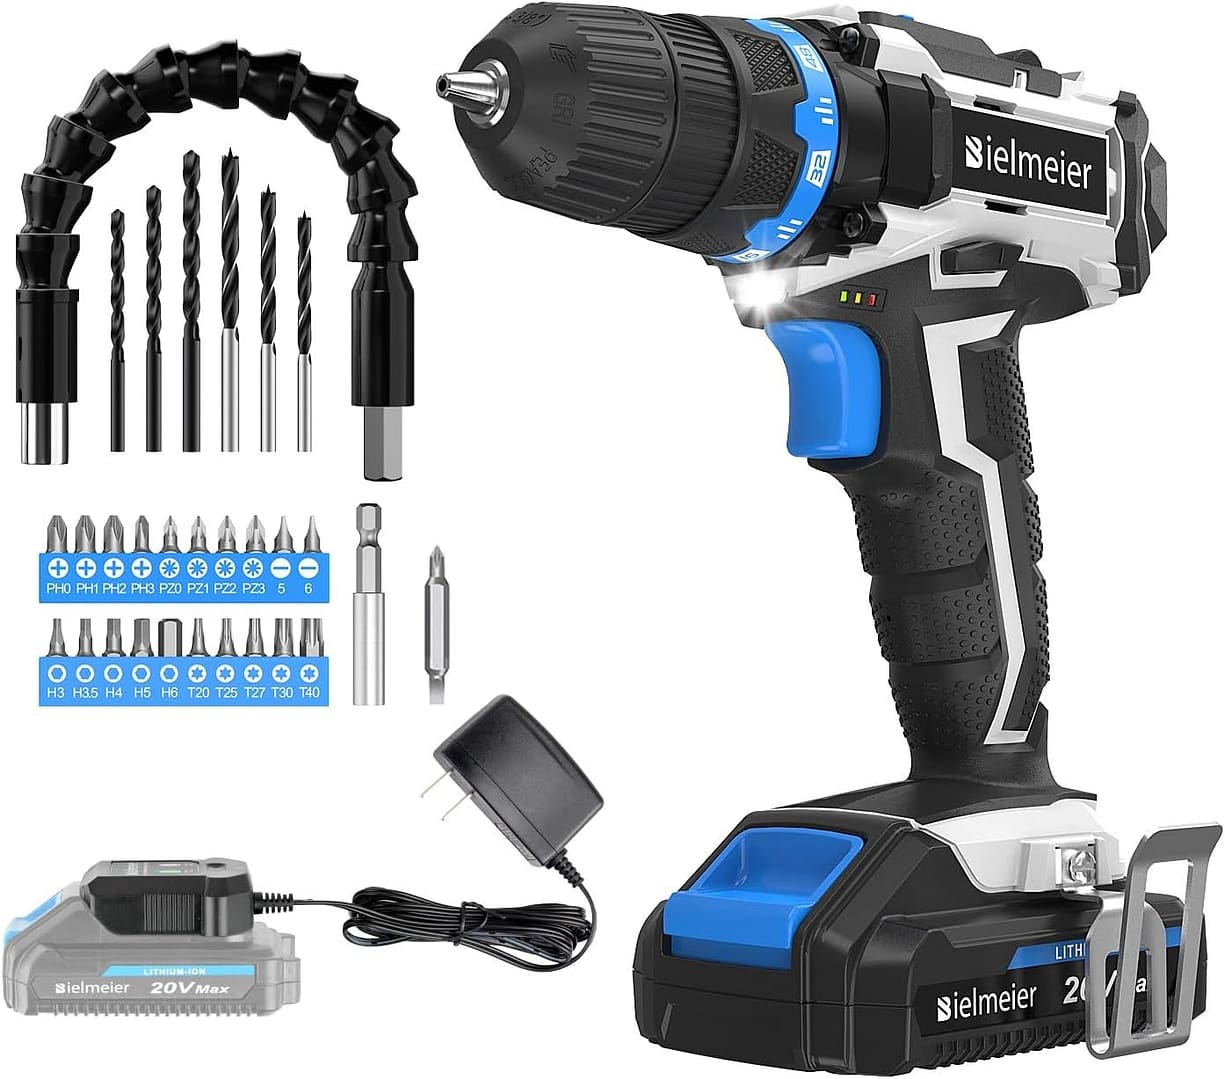 bielmeier 20v max cordless drill set power drill kit with lithium ion and charger38 inches keyless chuck electric drill